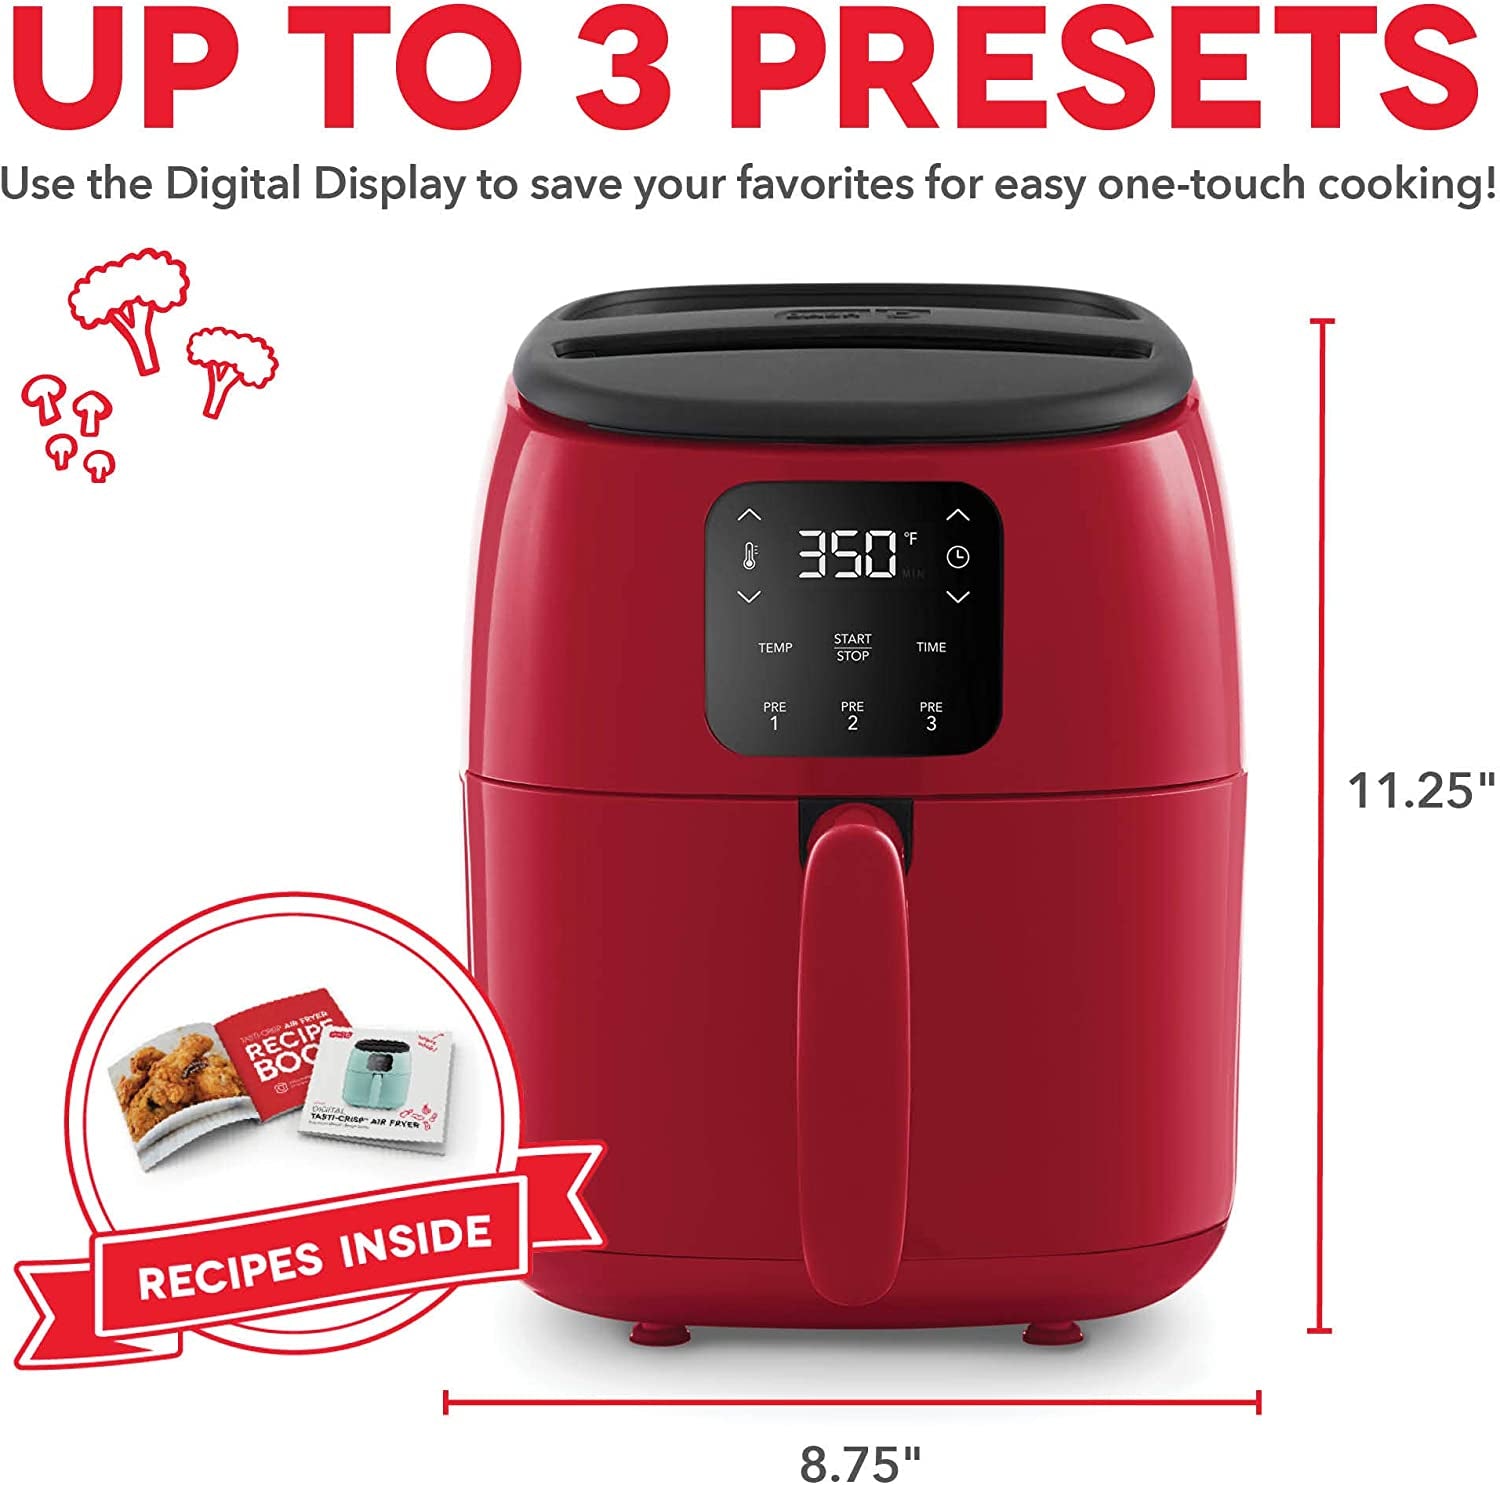 2.6 Quart Red Digital Air Fryer with Aircrisp Technology, Custom Presets, Temperature Control, and Auto Shut off Feature